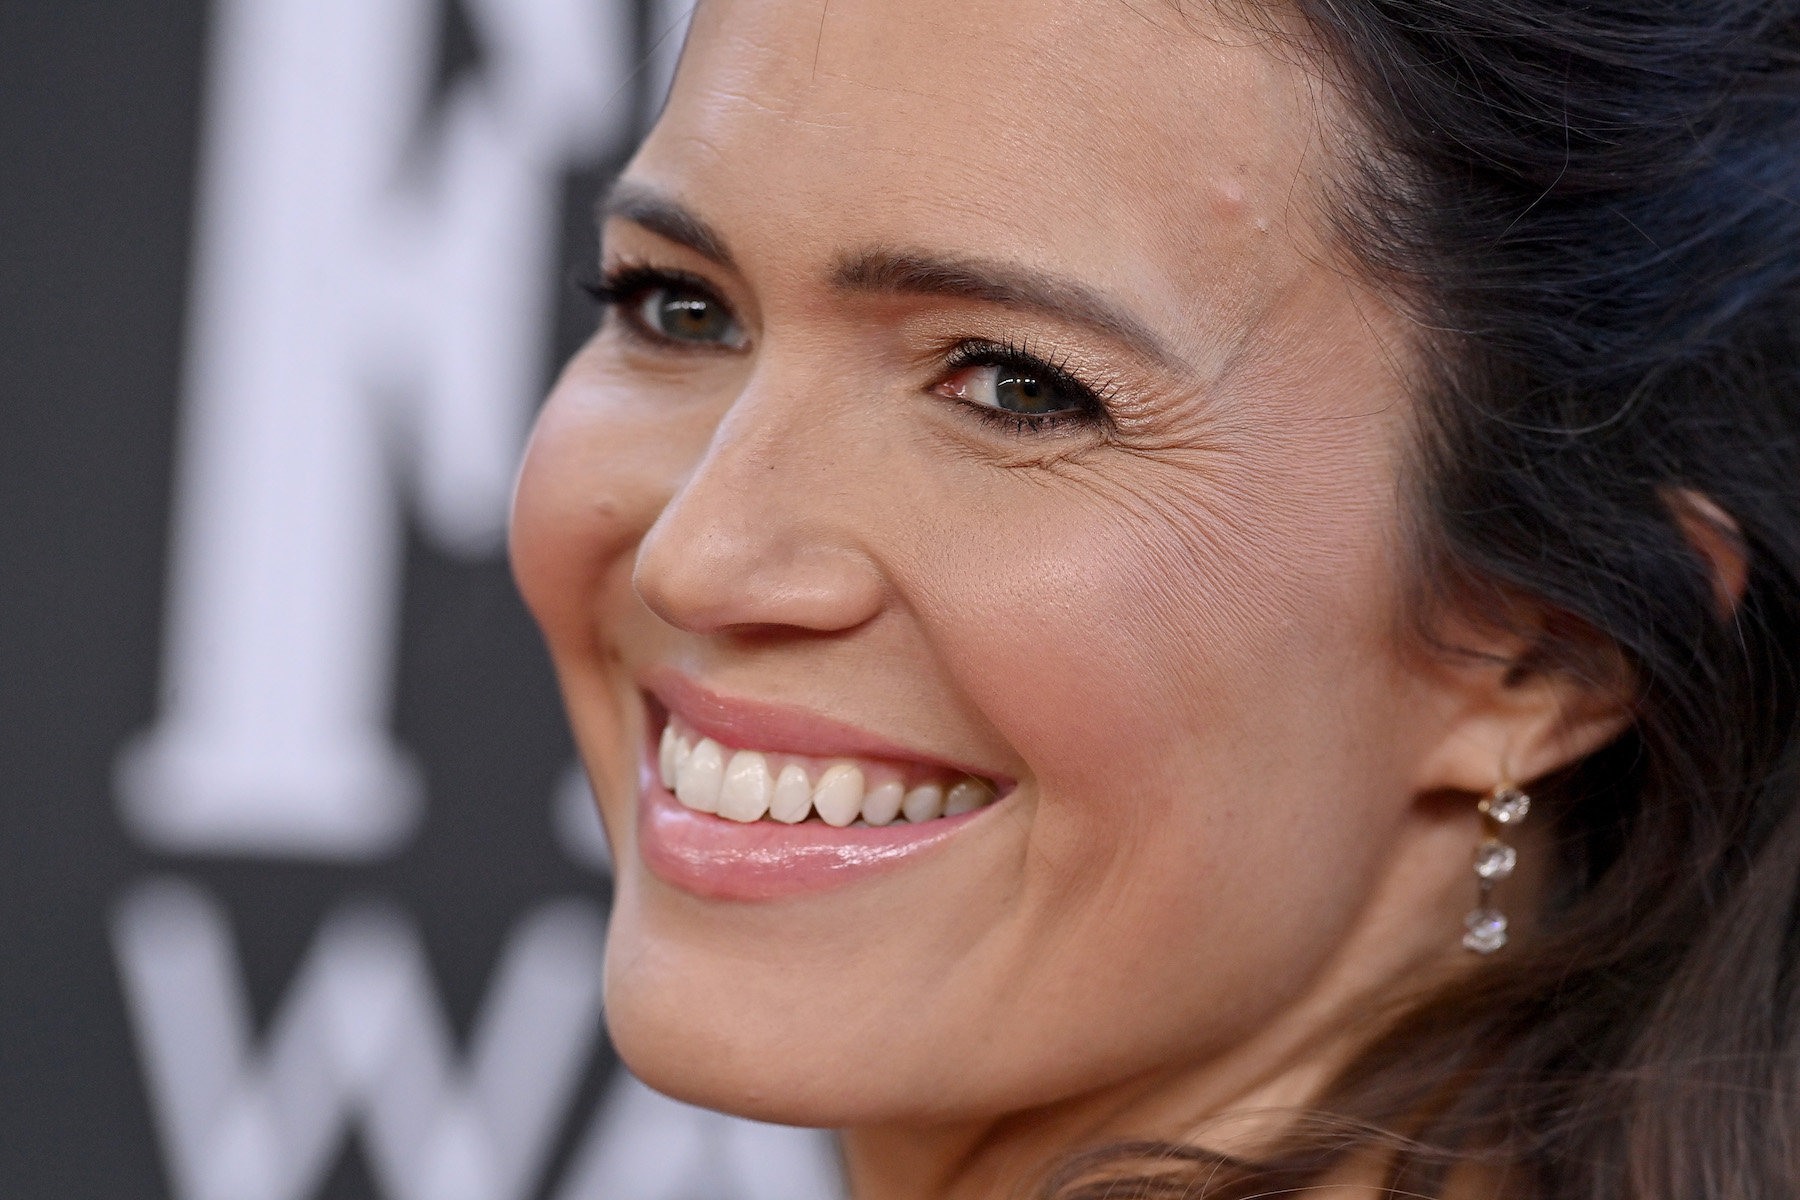 A close-up of 'This Is Us' actor Mandy Moore